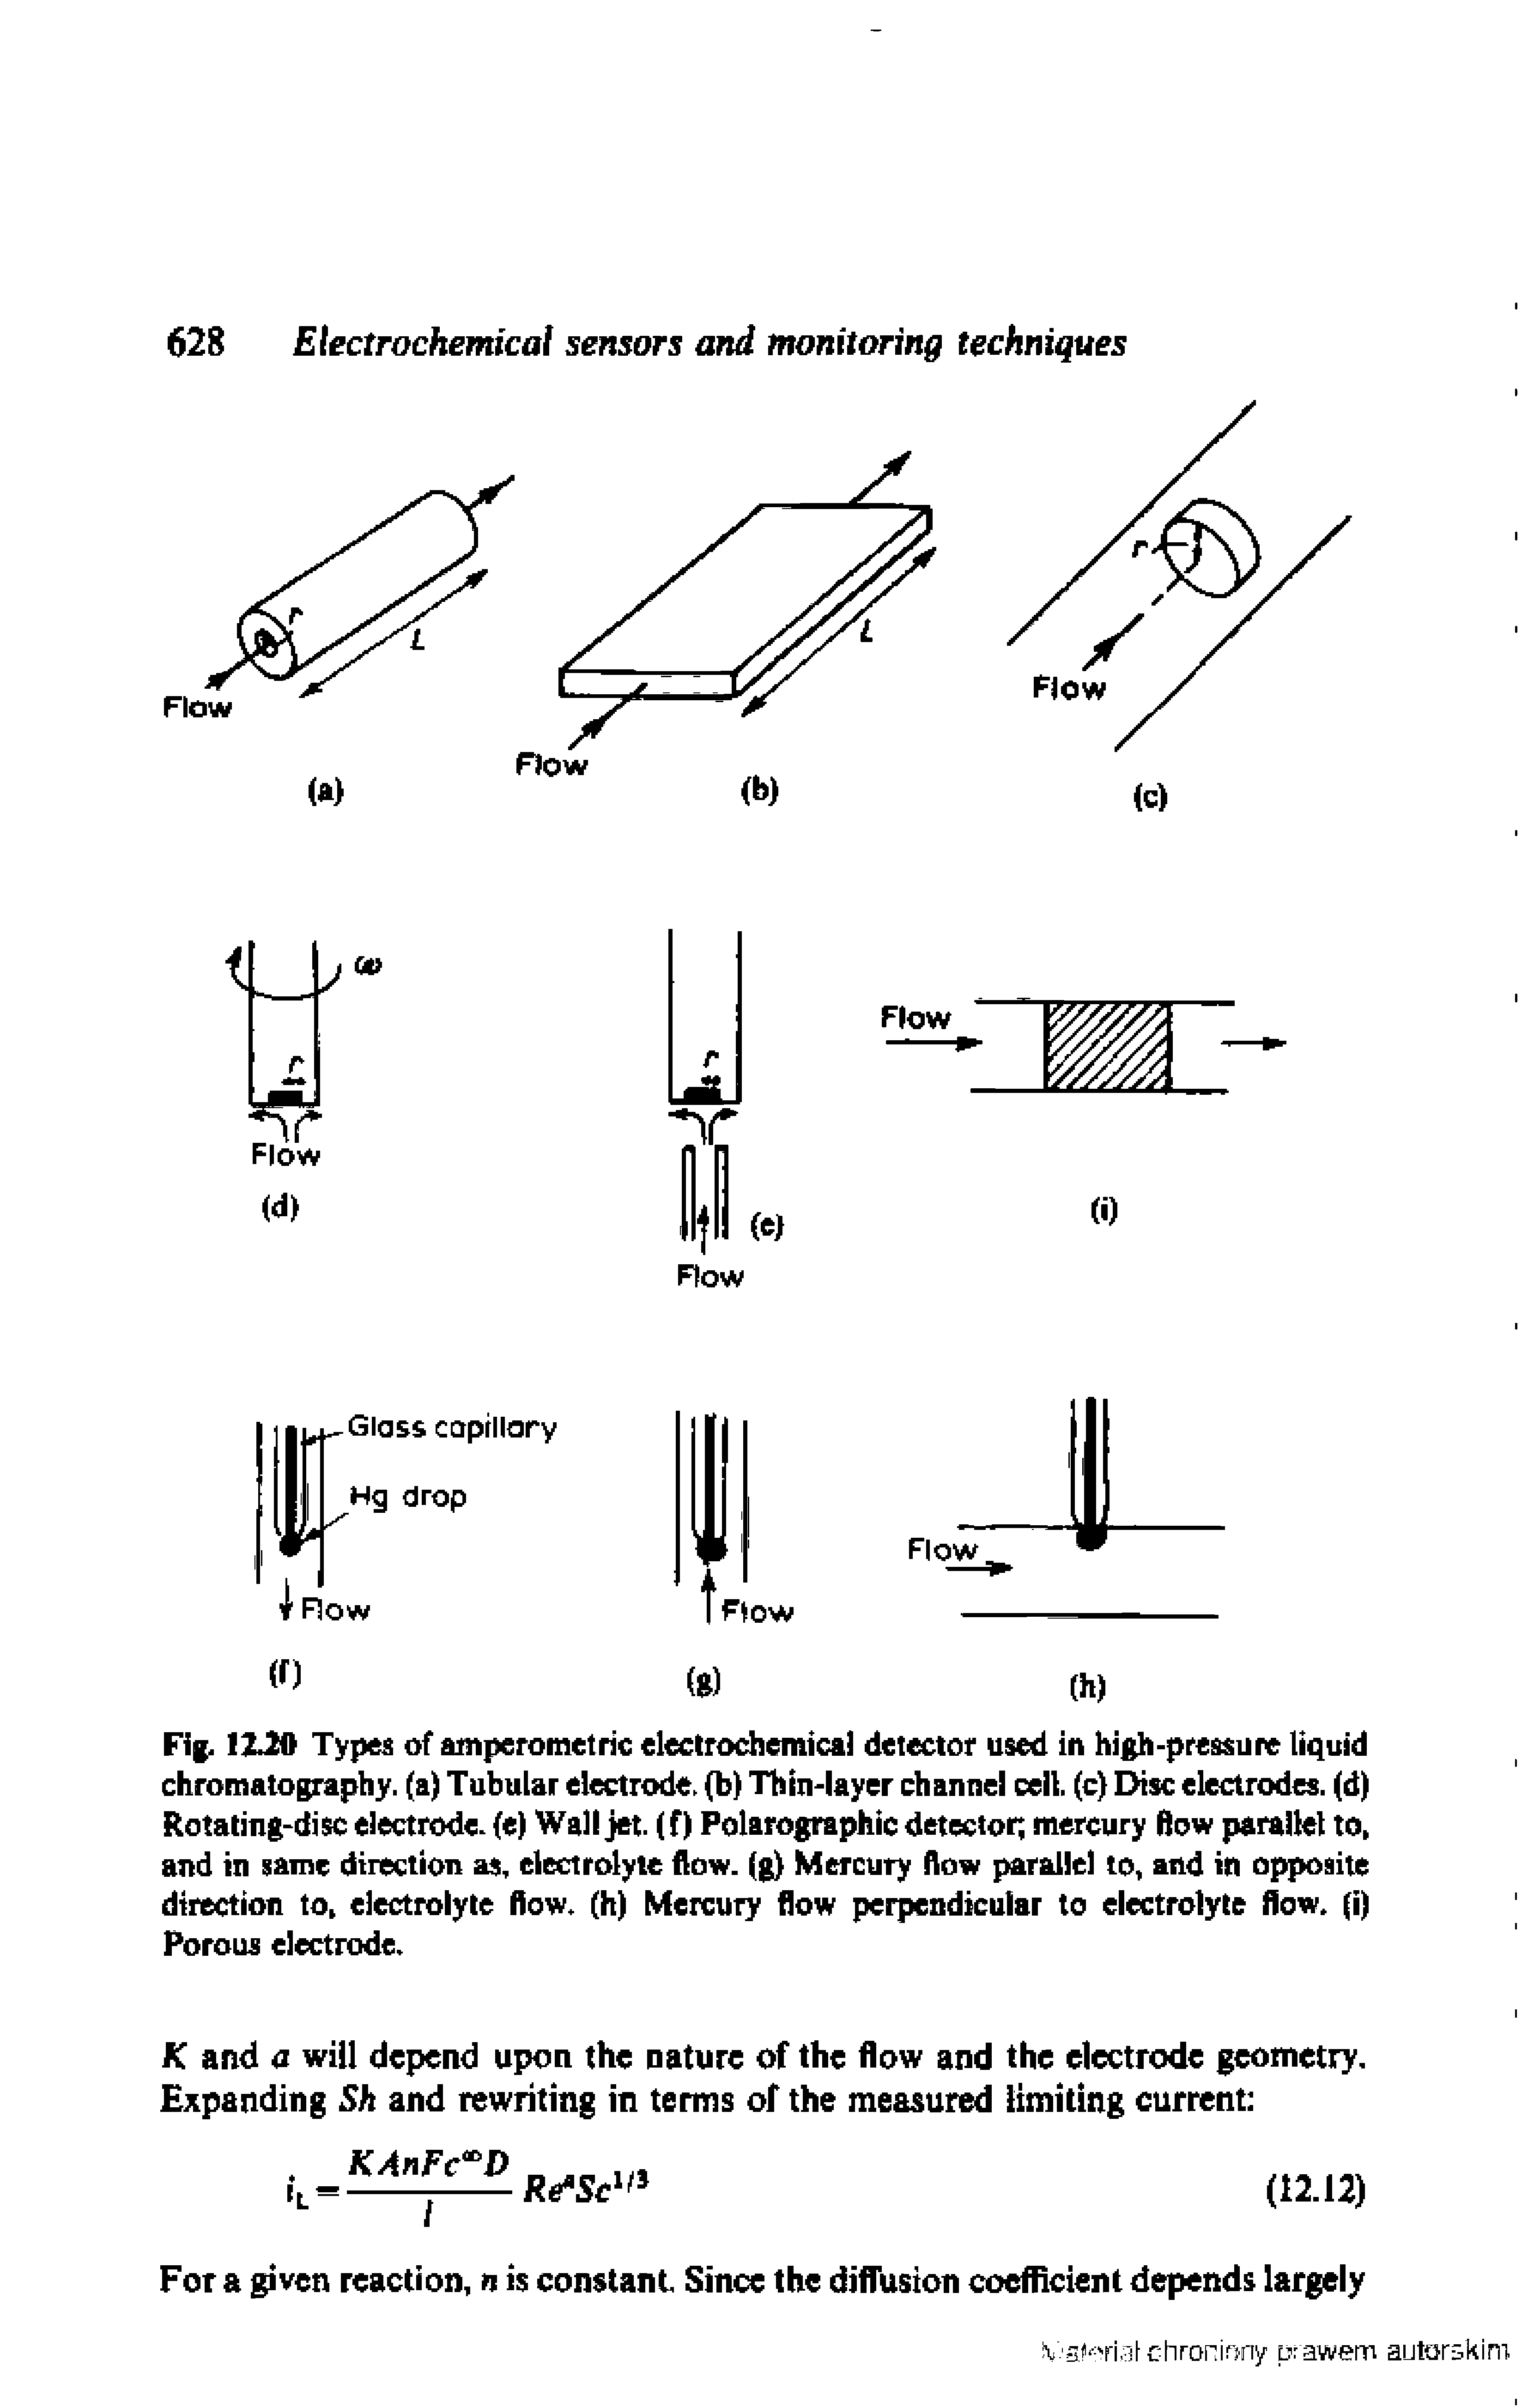 Fig. 12.20 Typej of amperomctric electrochemica] detector used in high-pressure liquid chromatography, (a) Tubular electrode, (b) Thin-layer channel cell, (c) Disc electrodes, (d) Rotating-disc electrode, (e) Wall jet. (f) Polarographic detector mercury Aow parallel to and in same direction as, electrolyte flow, (g) Mercury flow parallel to, and in opposite direction to, electrolyte flow, (h) Mercury flow perpendicular to electrolyte flow, (i) Porous electrode.